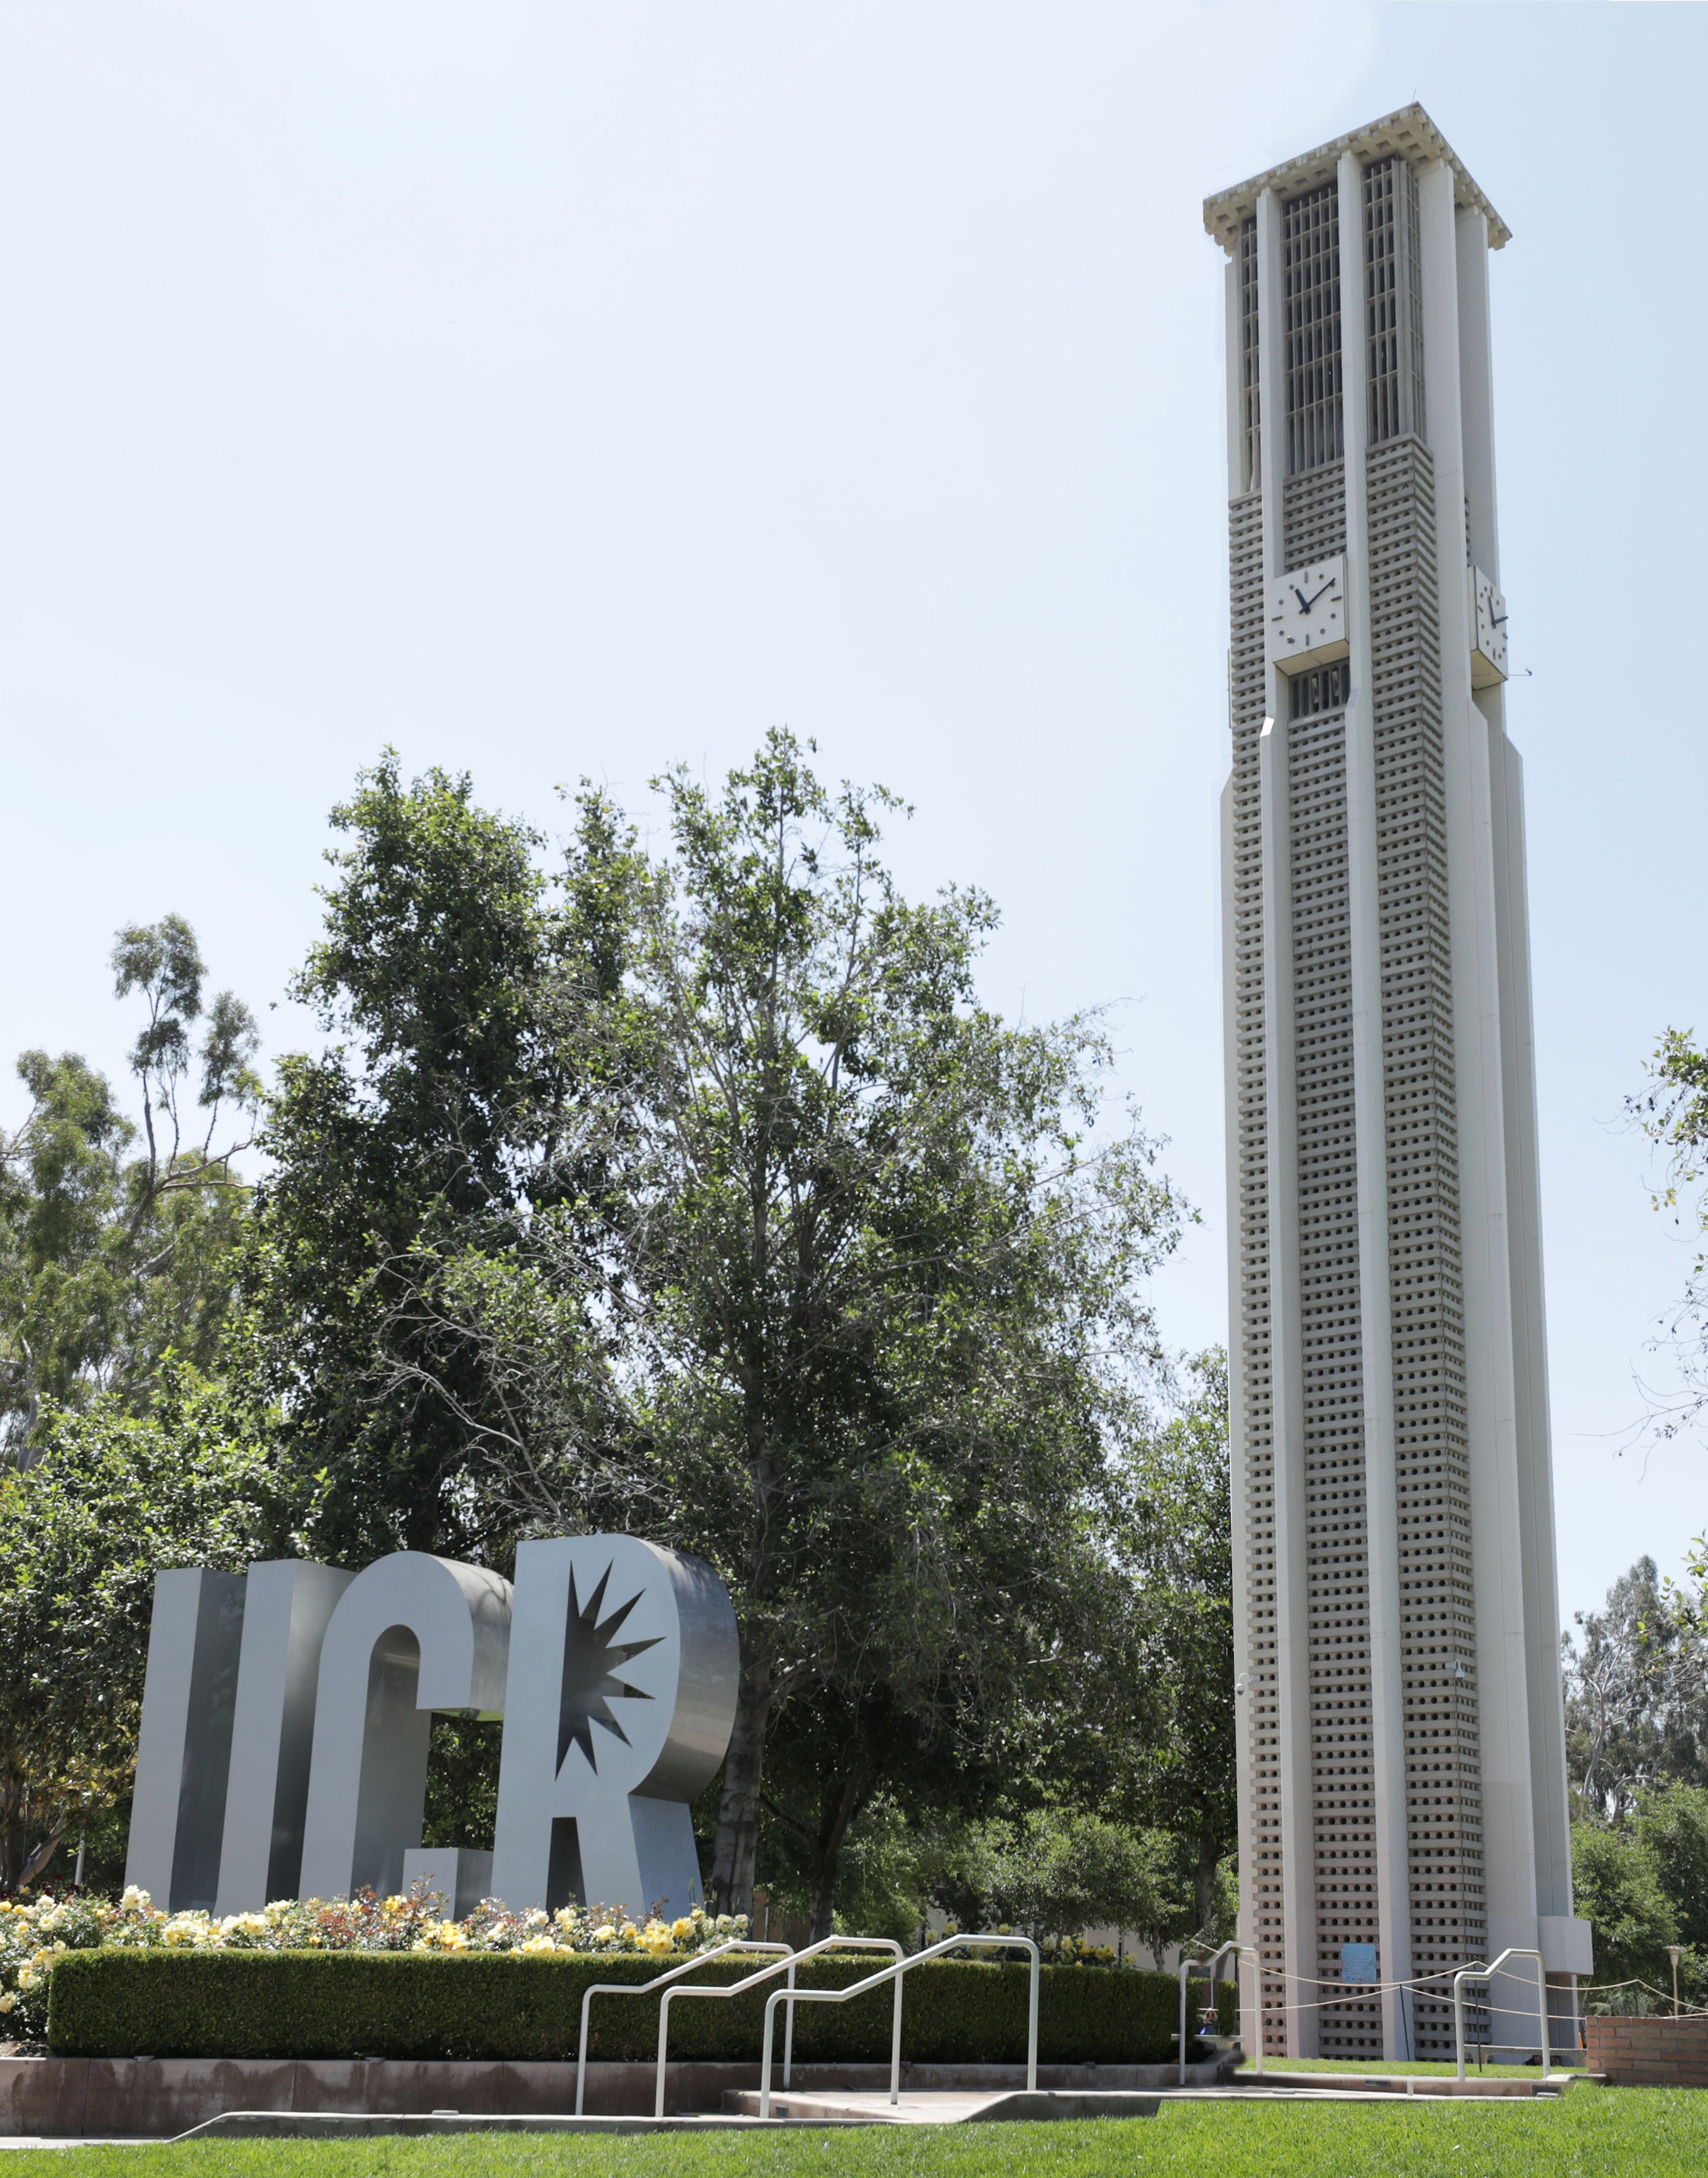 Belltower Giving to UCR